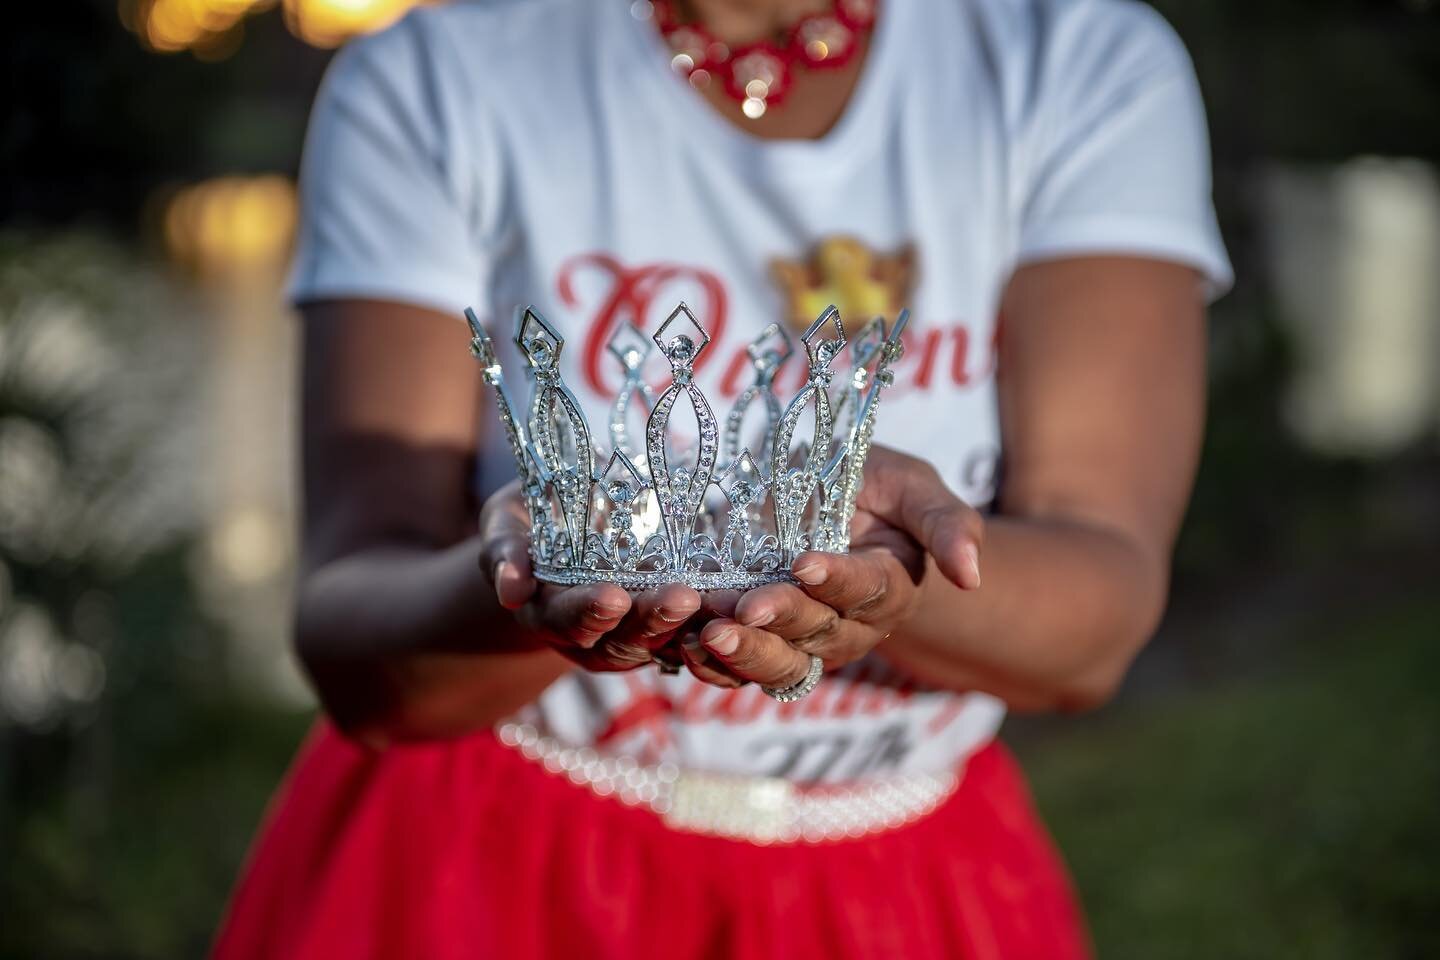 A queen never leaves her crown at home 

Queen Birthday Shoot  1.16.21

#southflphotographer #awesomeshots #eventphotoedgraphy #eventplanning #sharpimages #southflorida #photographer #art #artist #wedding #weddingphotographer #capturinglifesgreatestm